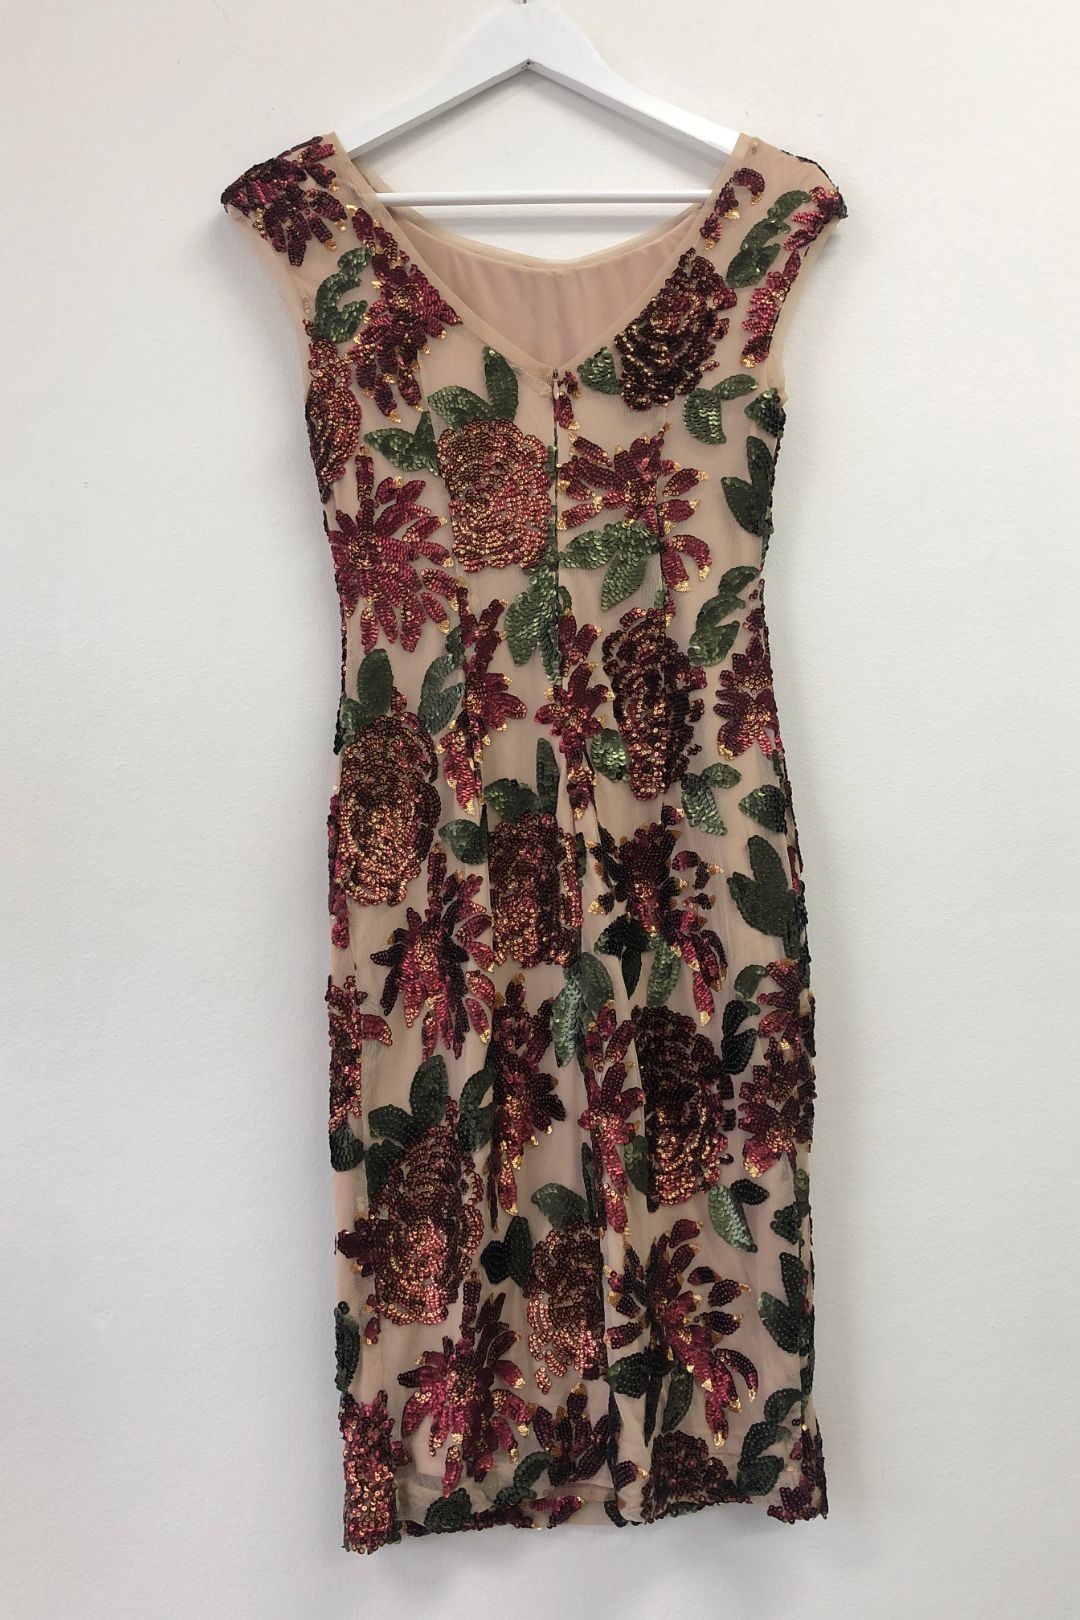 Moss and Spy - Floral Sequin Dress